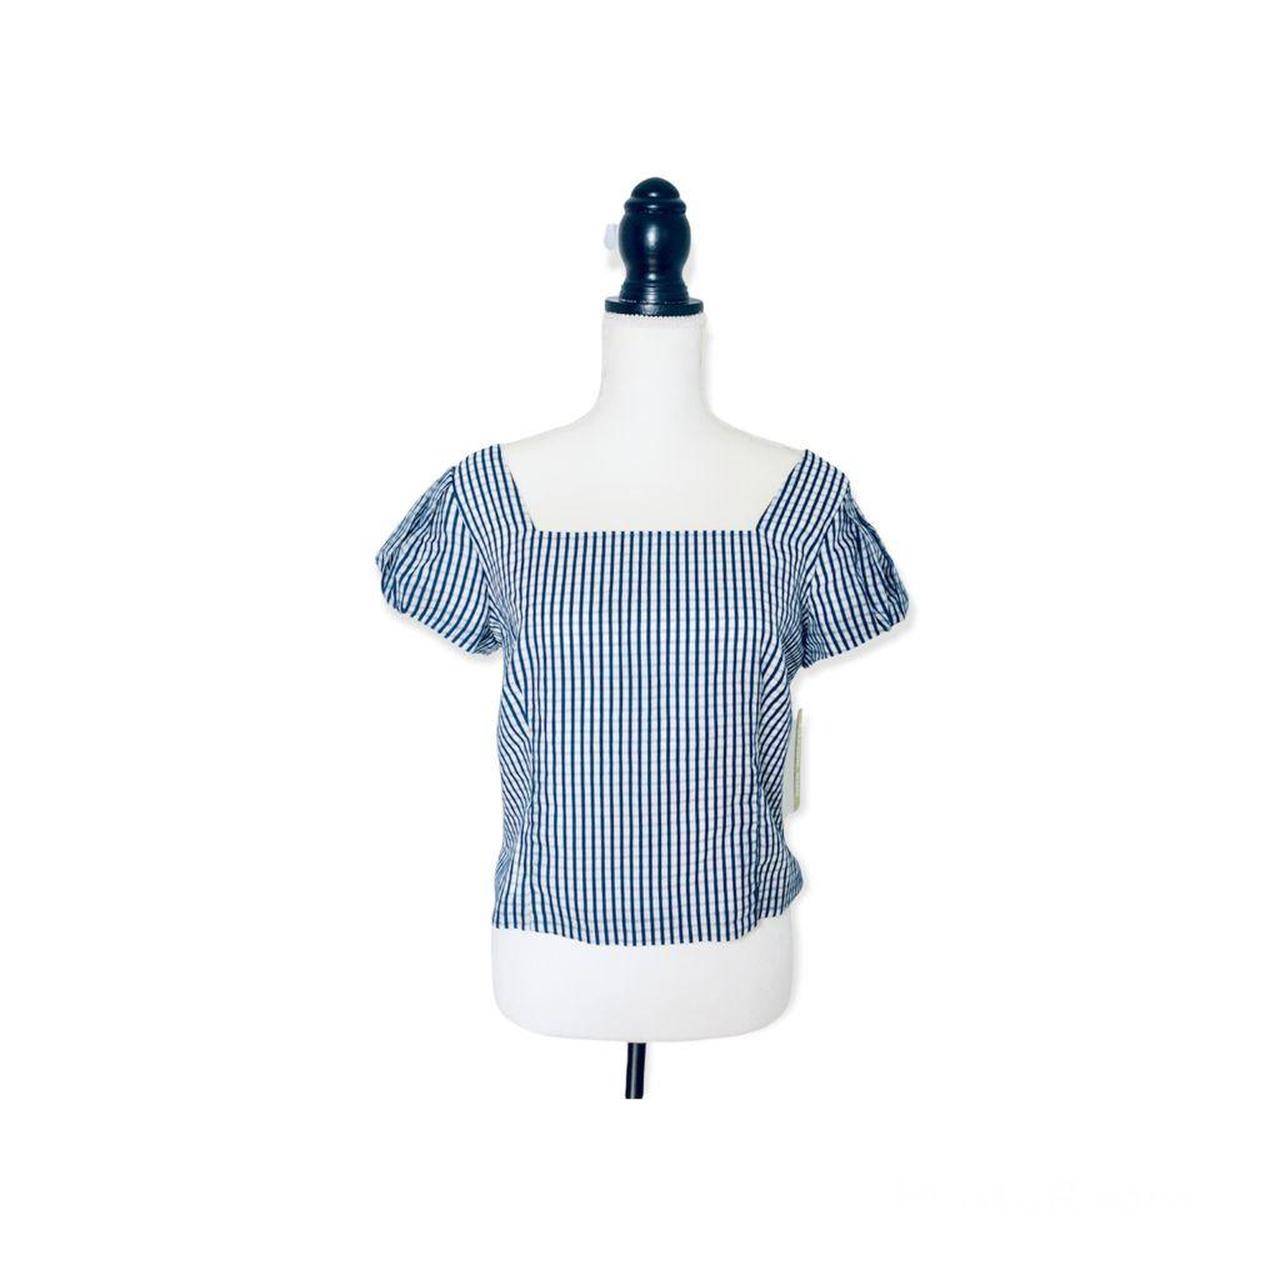 Product Image 1 - Gorgeous square neck top
Navy and